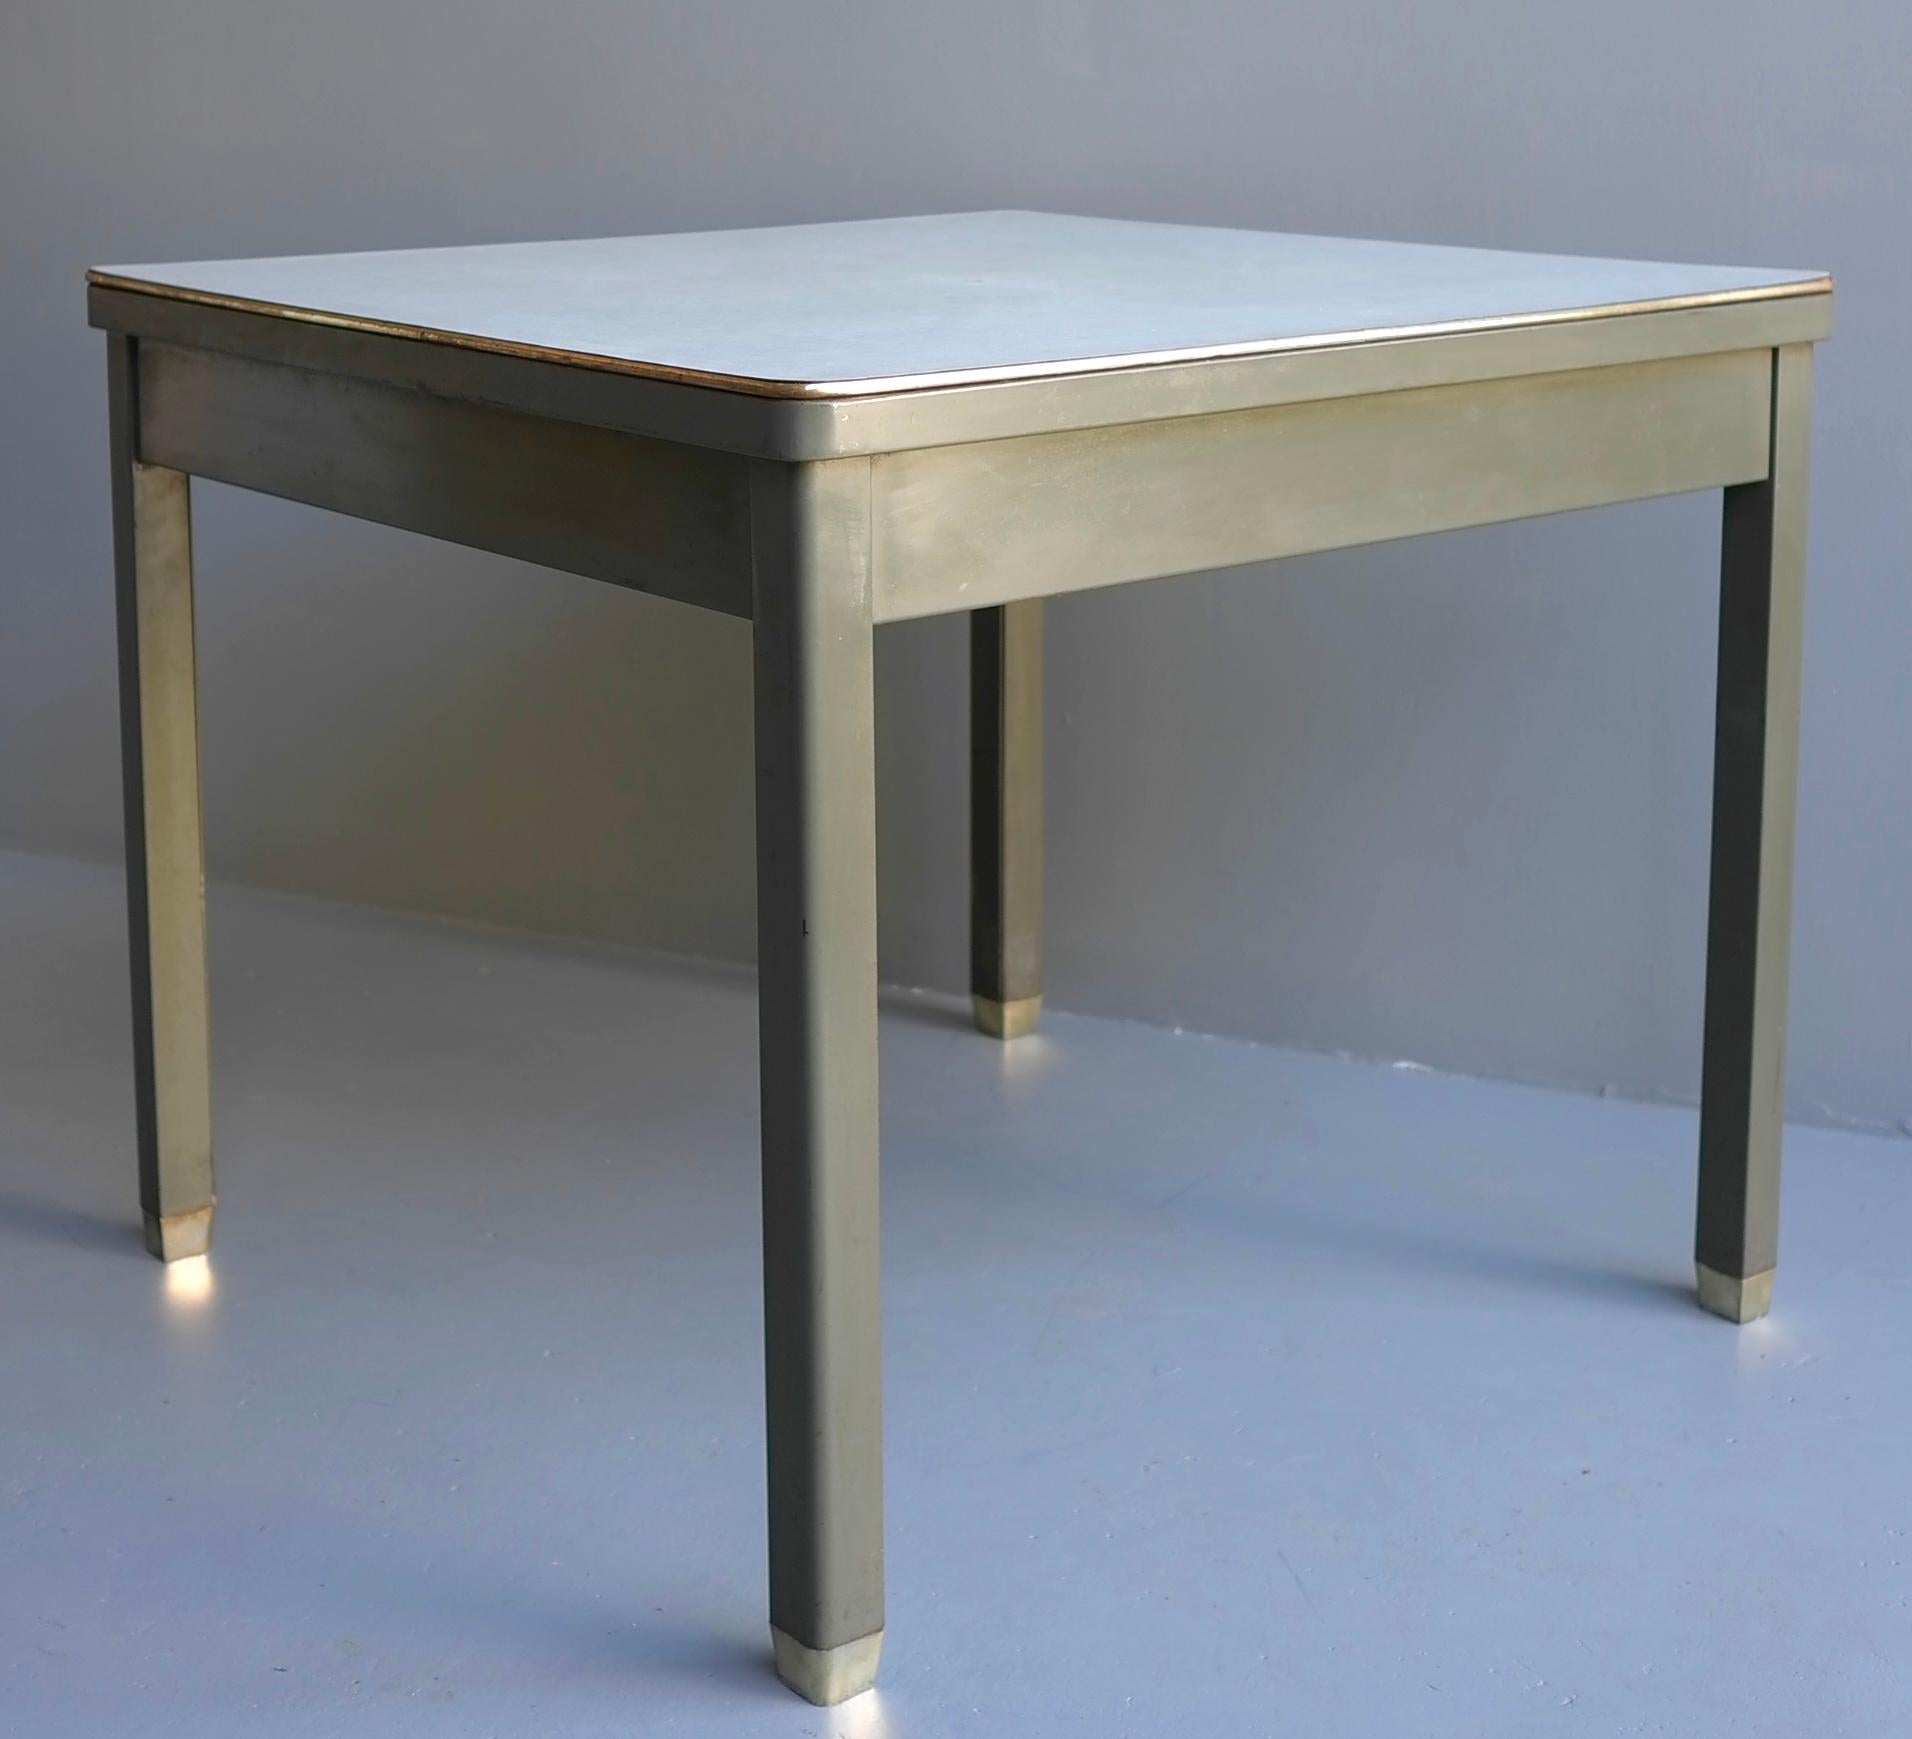 4x Industrial Work Table in Green Metal with Brass Feet and Rim, Belgium, 1950s 1